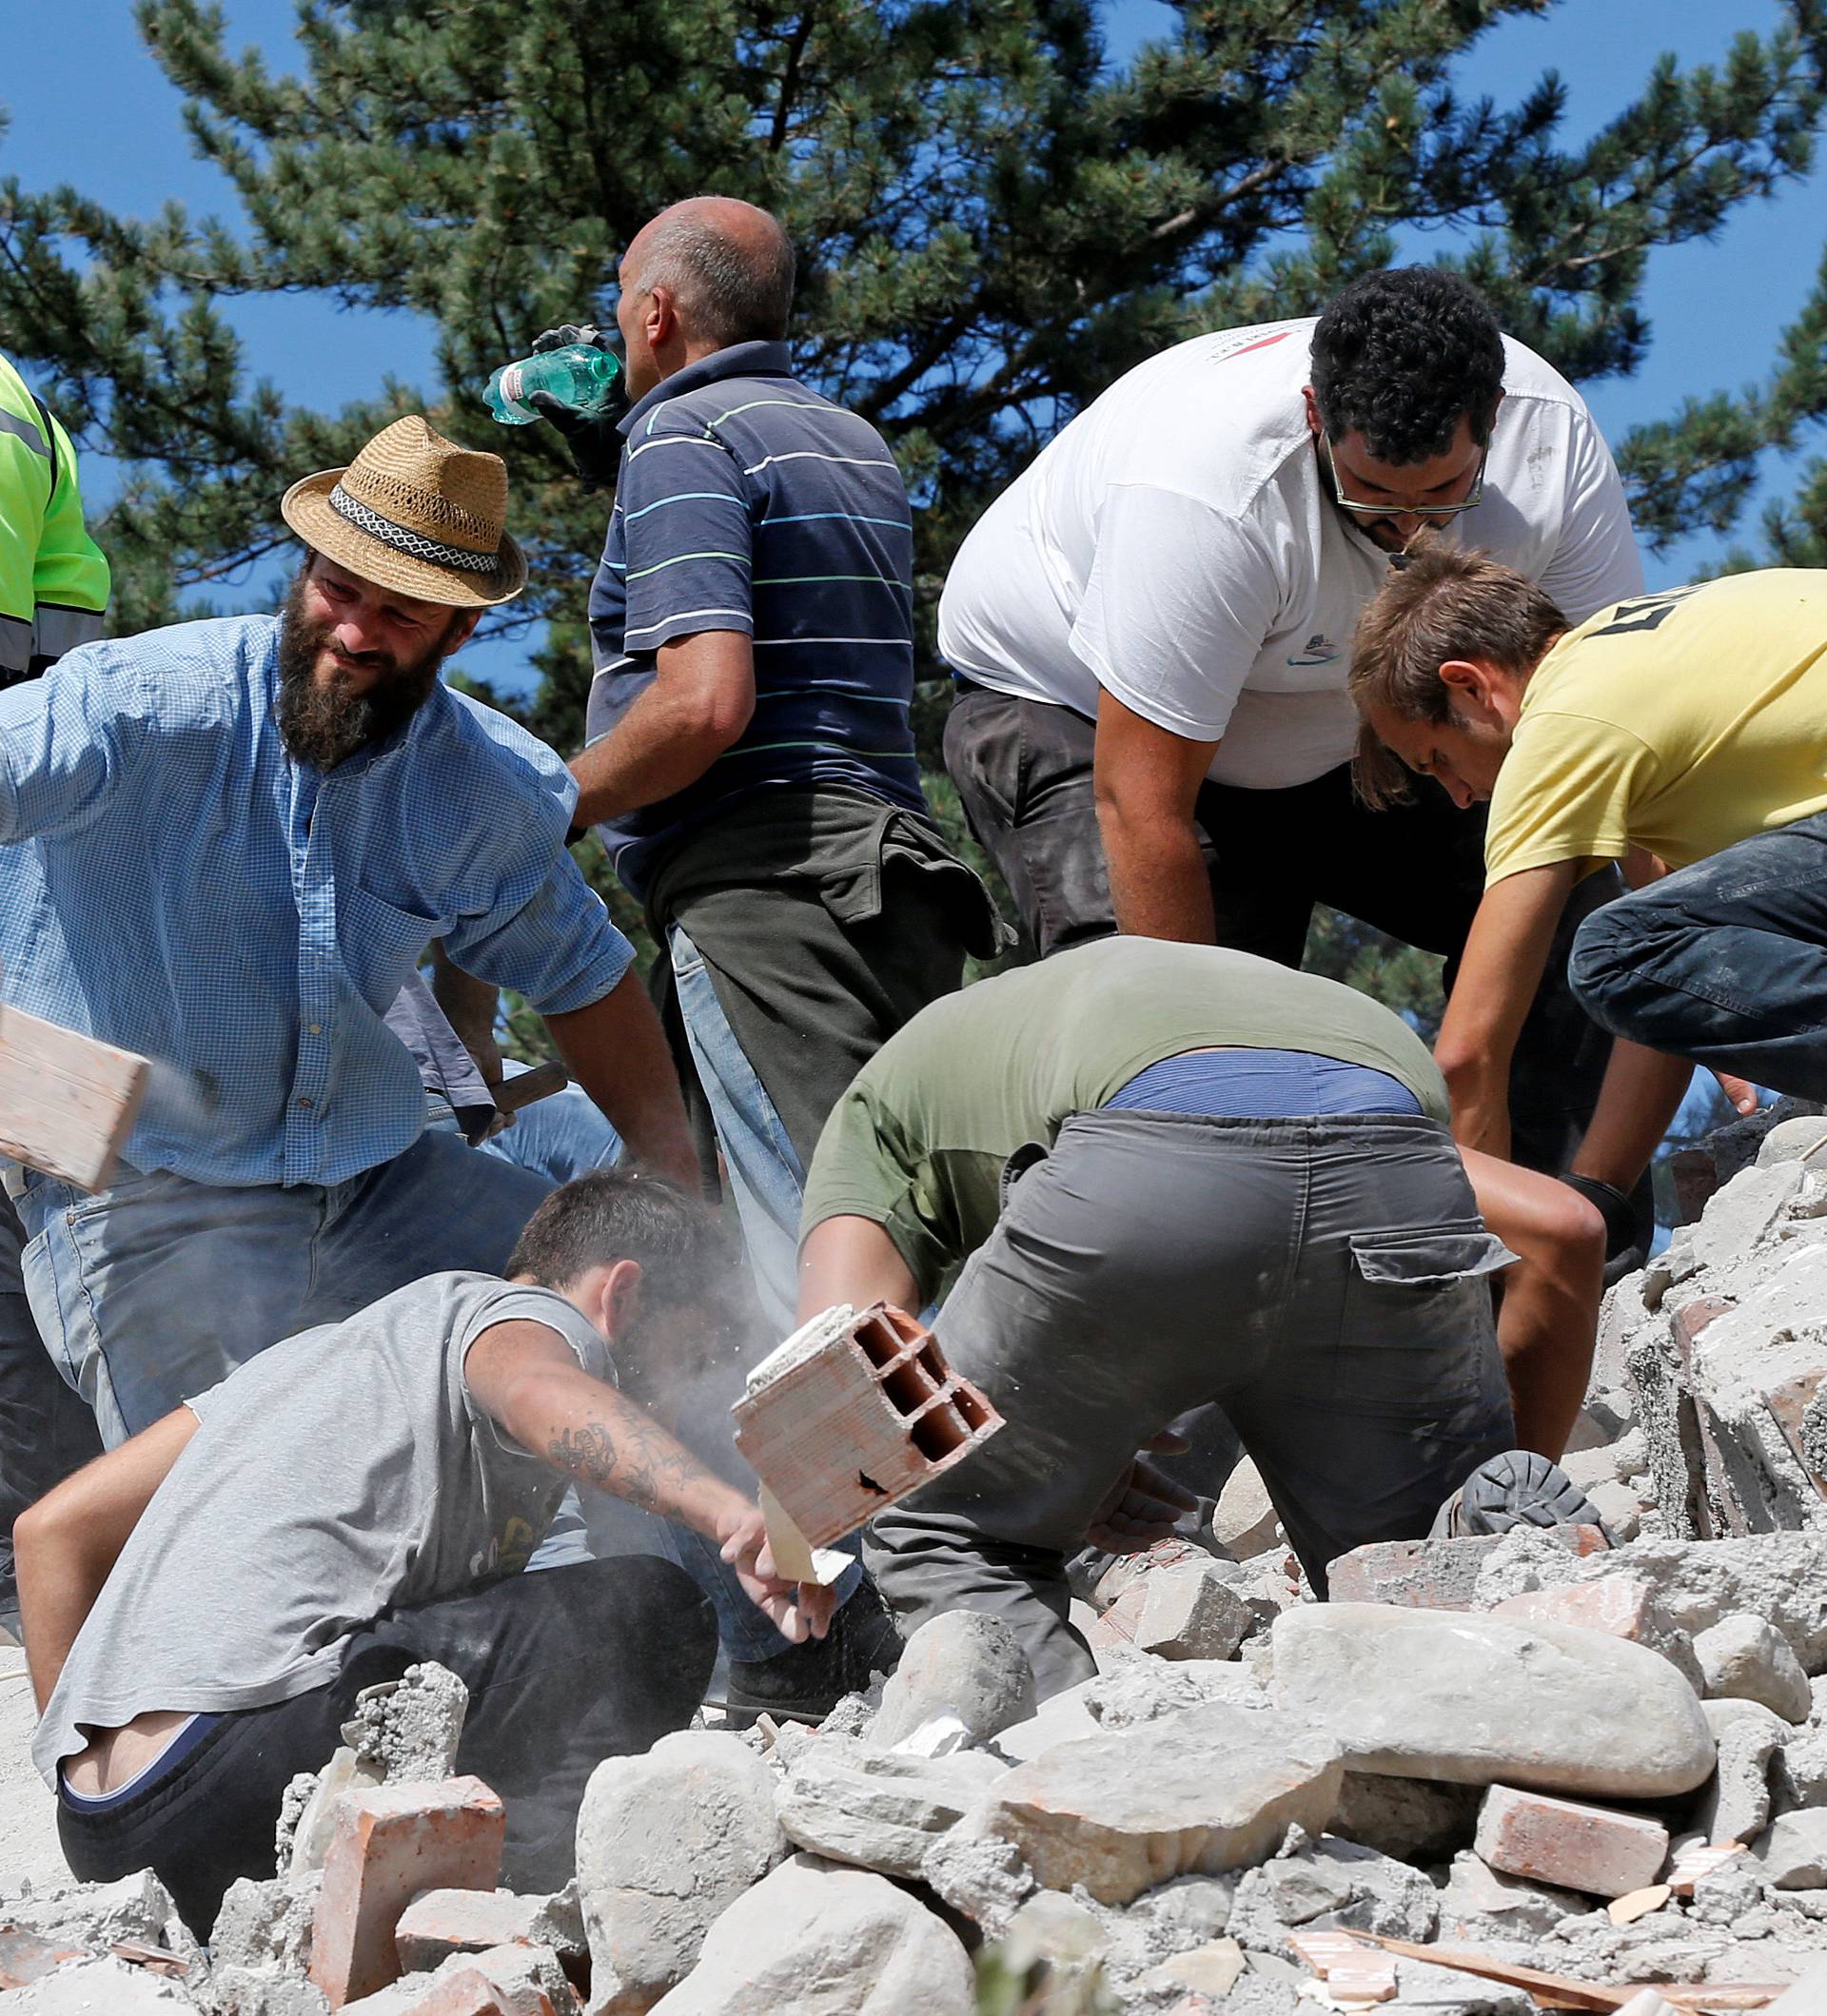 Rescuers work on a collapsed building following an earthquake in Amatrice